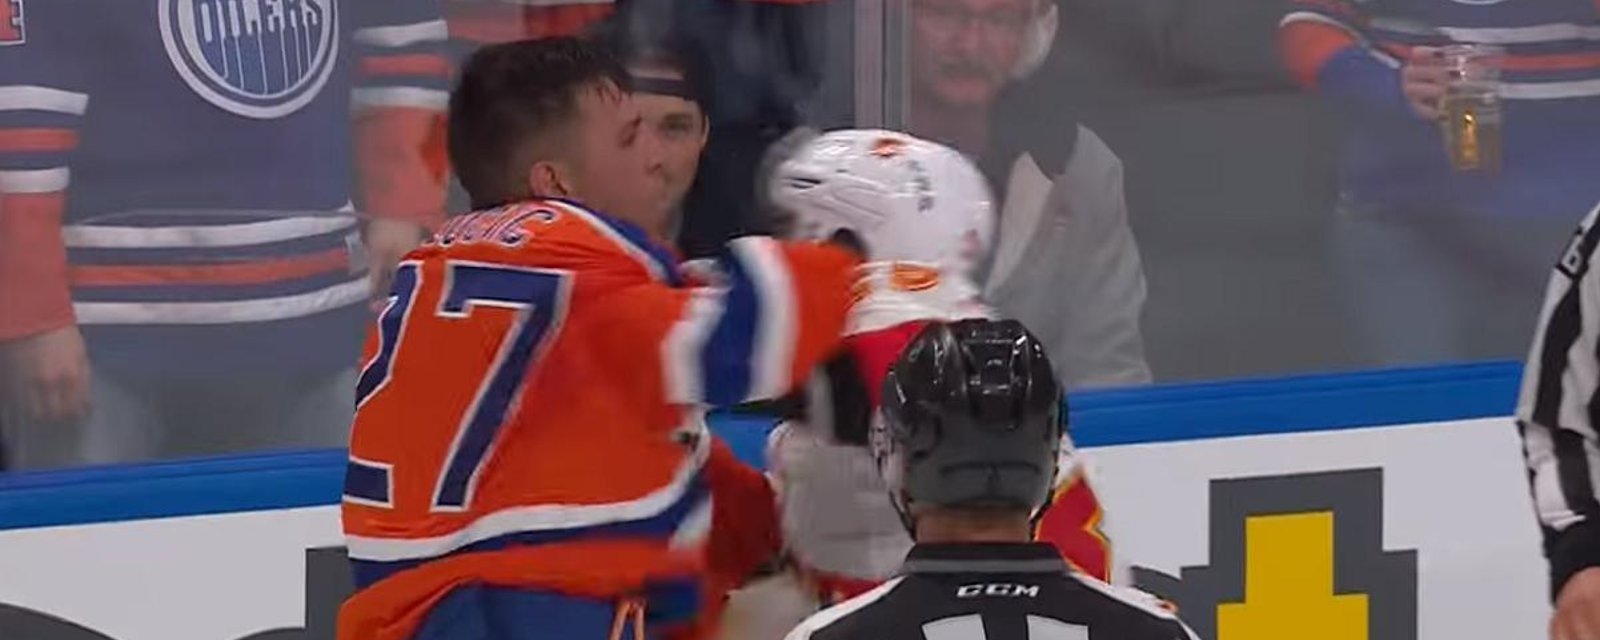 McDavid takes a hit in season opener and big bad Lucic comes to the rescue.